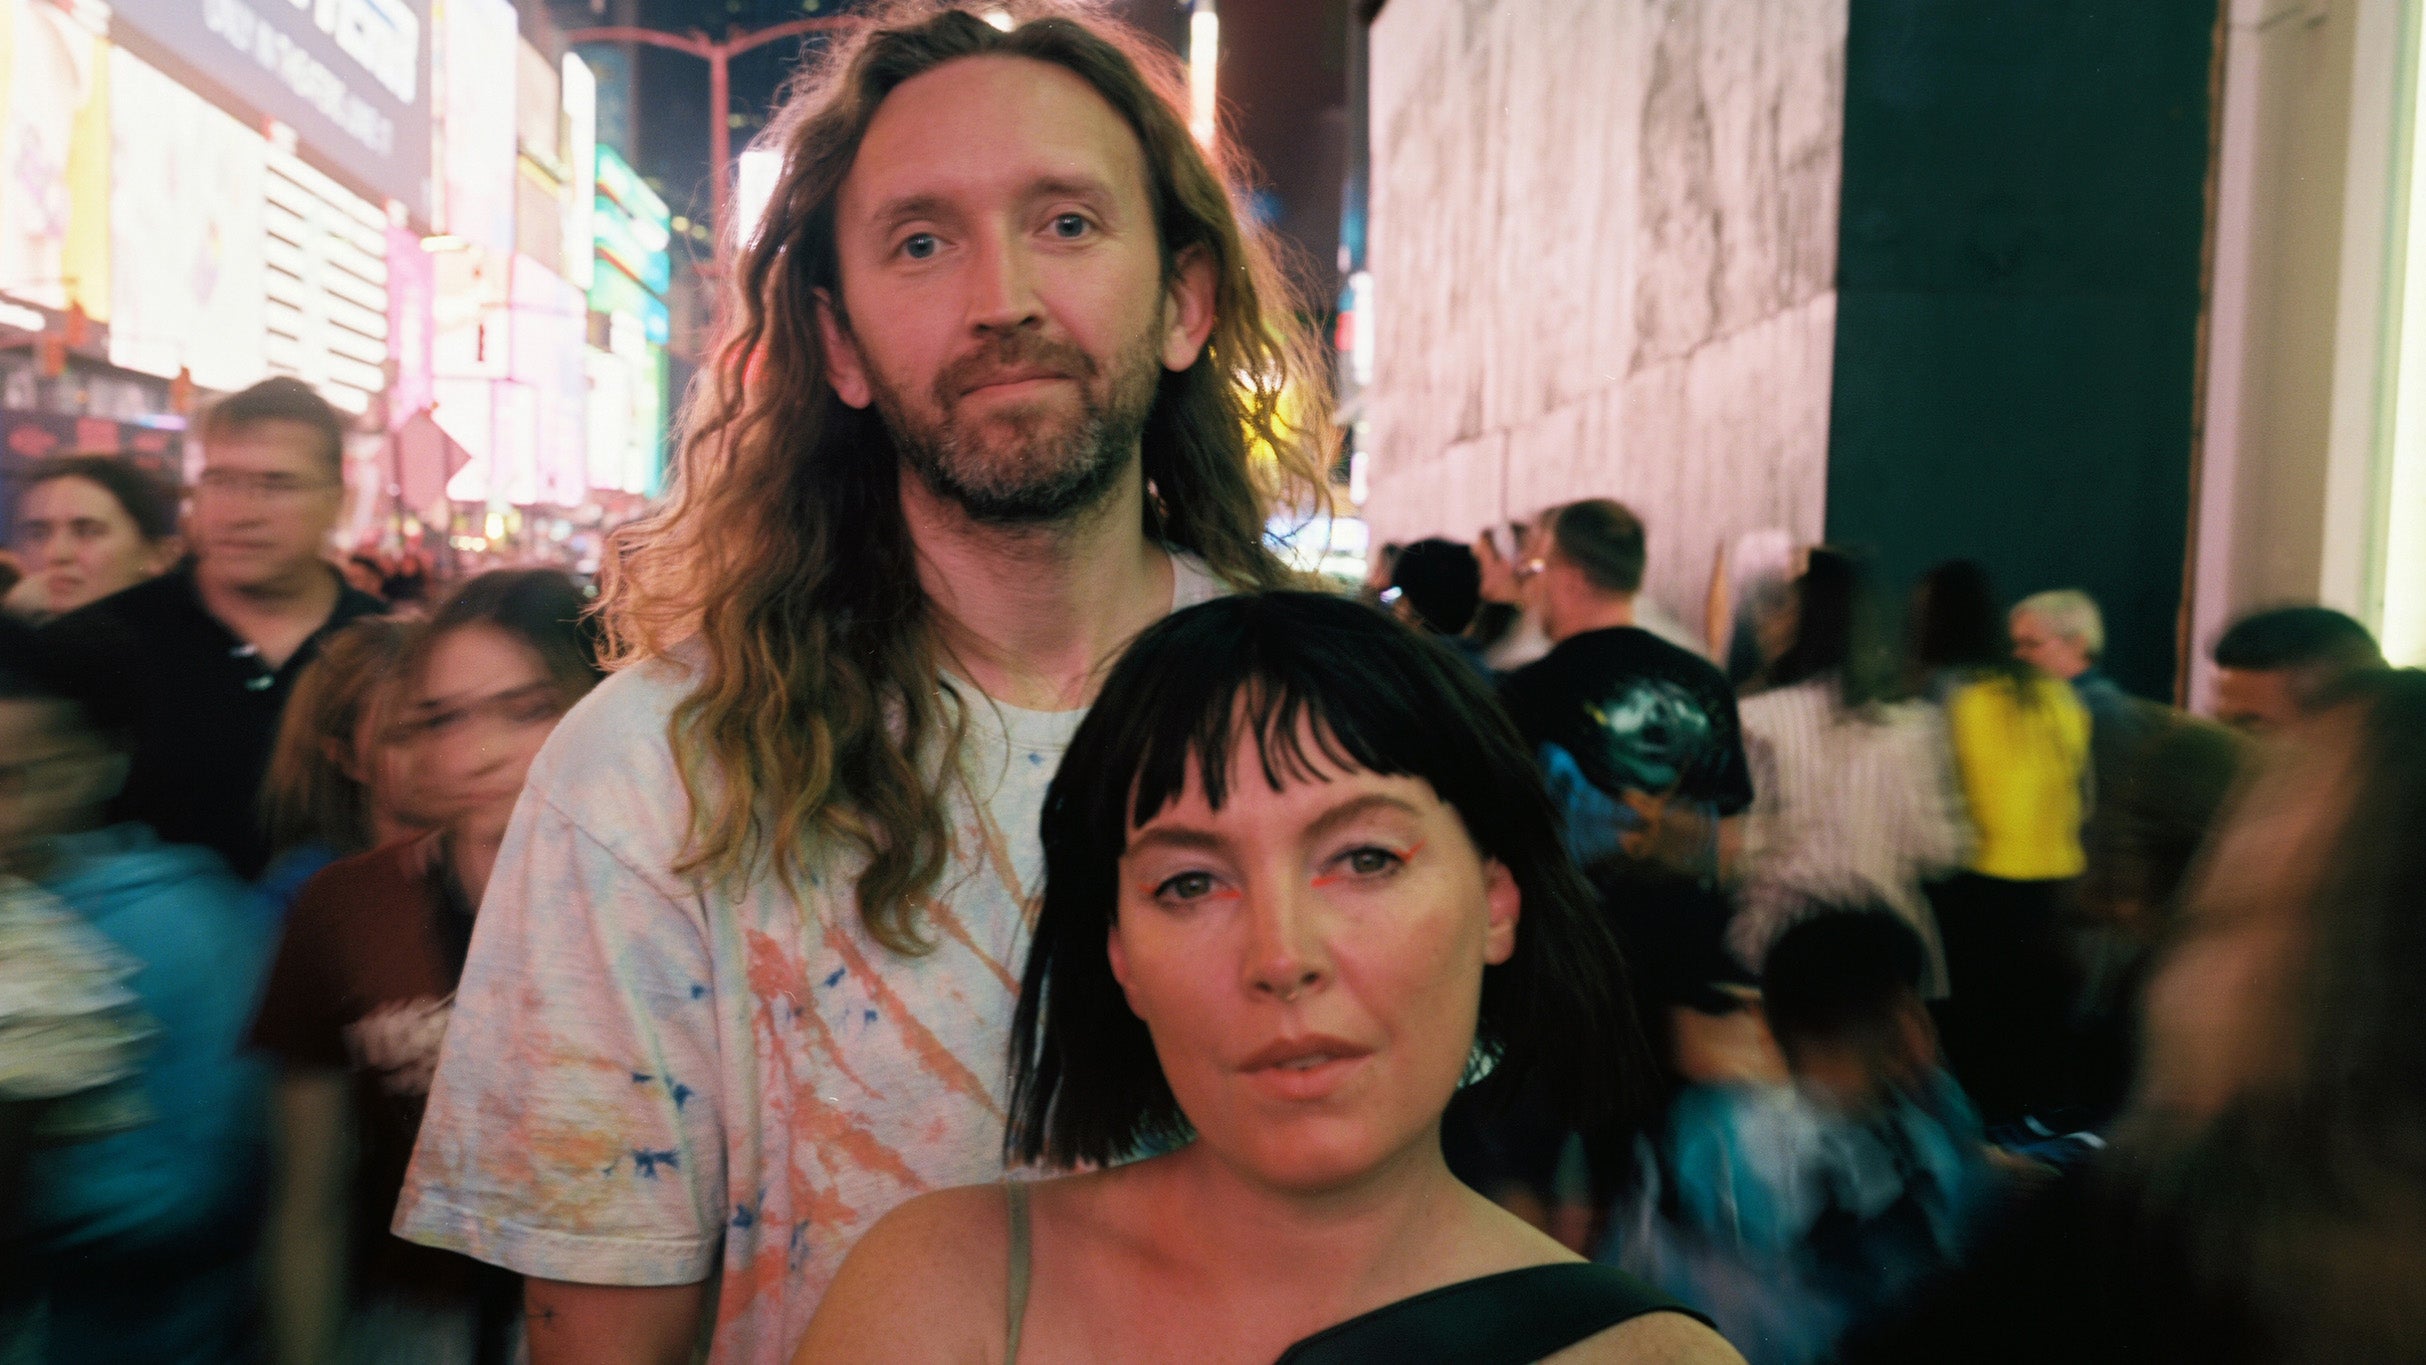 Sylvan Esso - No Rules (tour) With Grrl presale code for advance tickets in New Orleans